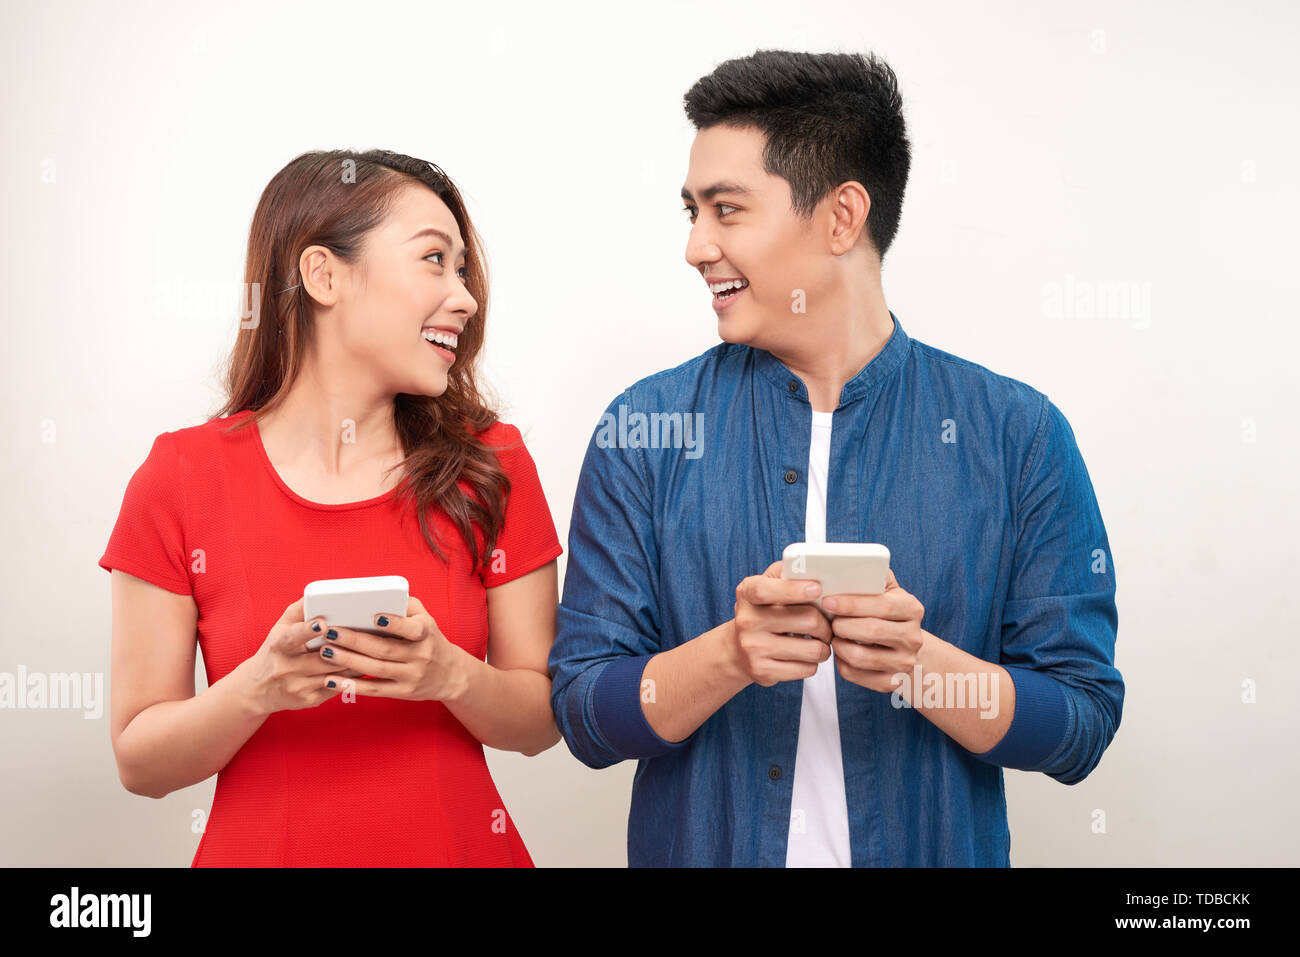 Beautiful smiling modern couple in casual wear with phones in hands on a white wall background Stock Photo